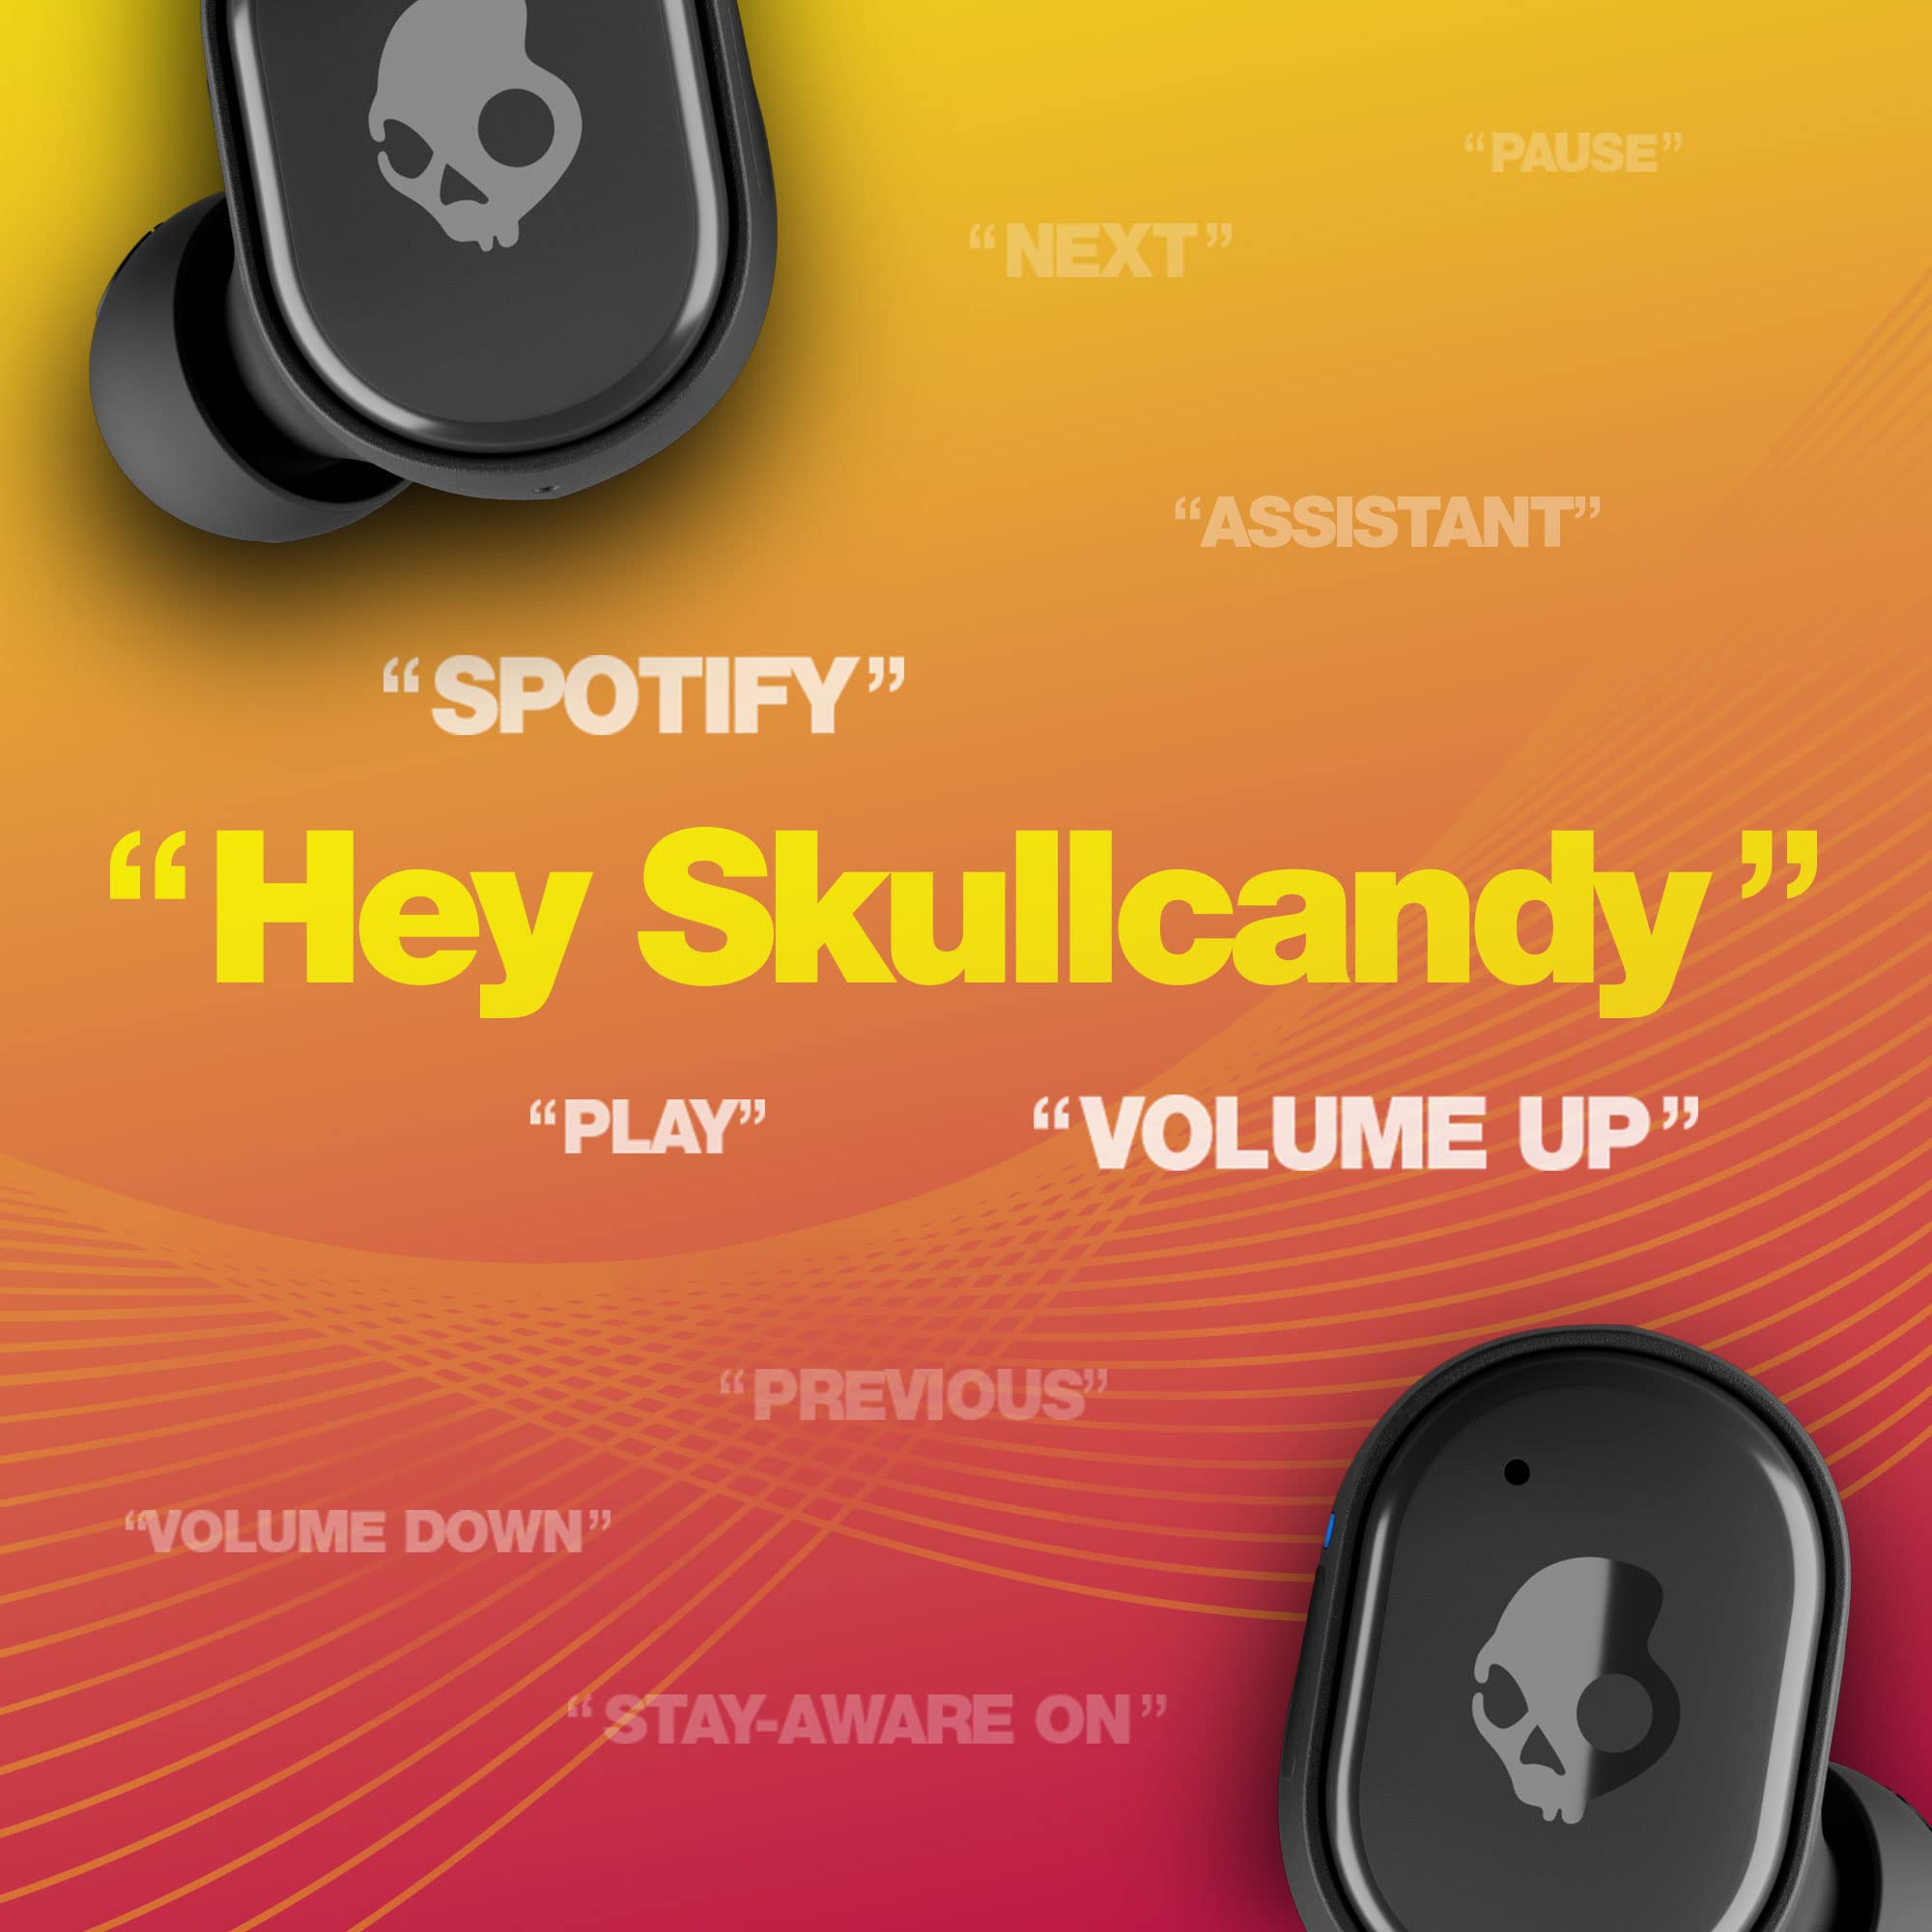 Skullcandy Grind In-Ear Wireless Earbuds, 40 Hr Battery, Microphone, Works with iPhone Android and Bluetooth Devices - Black